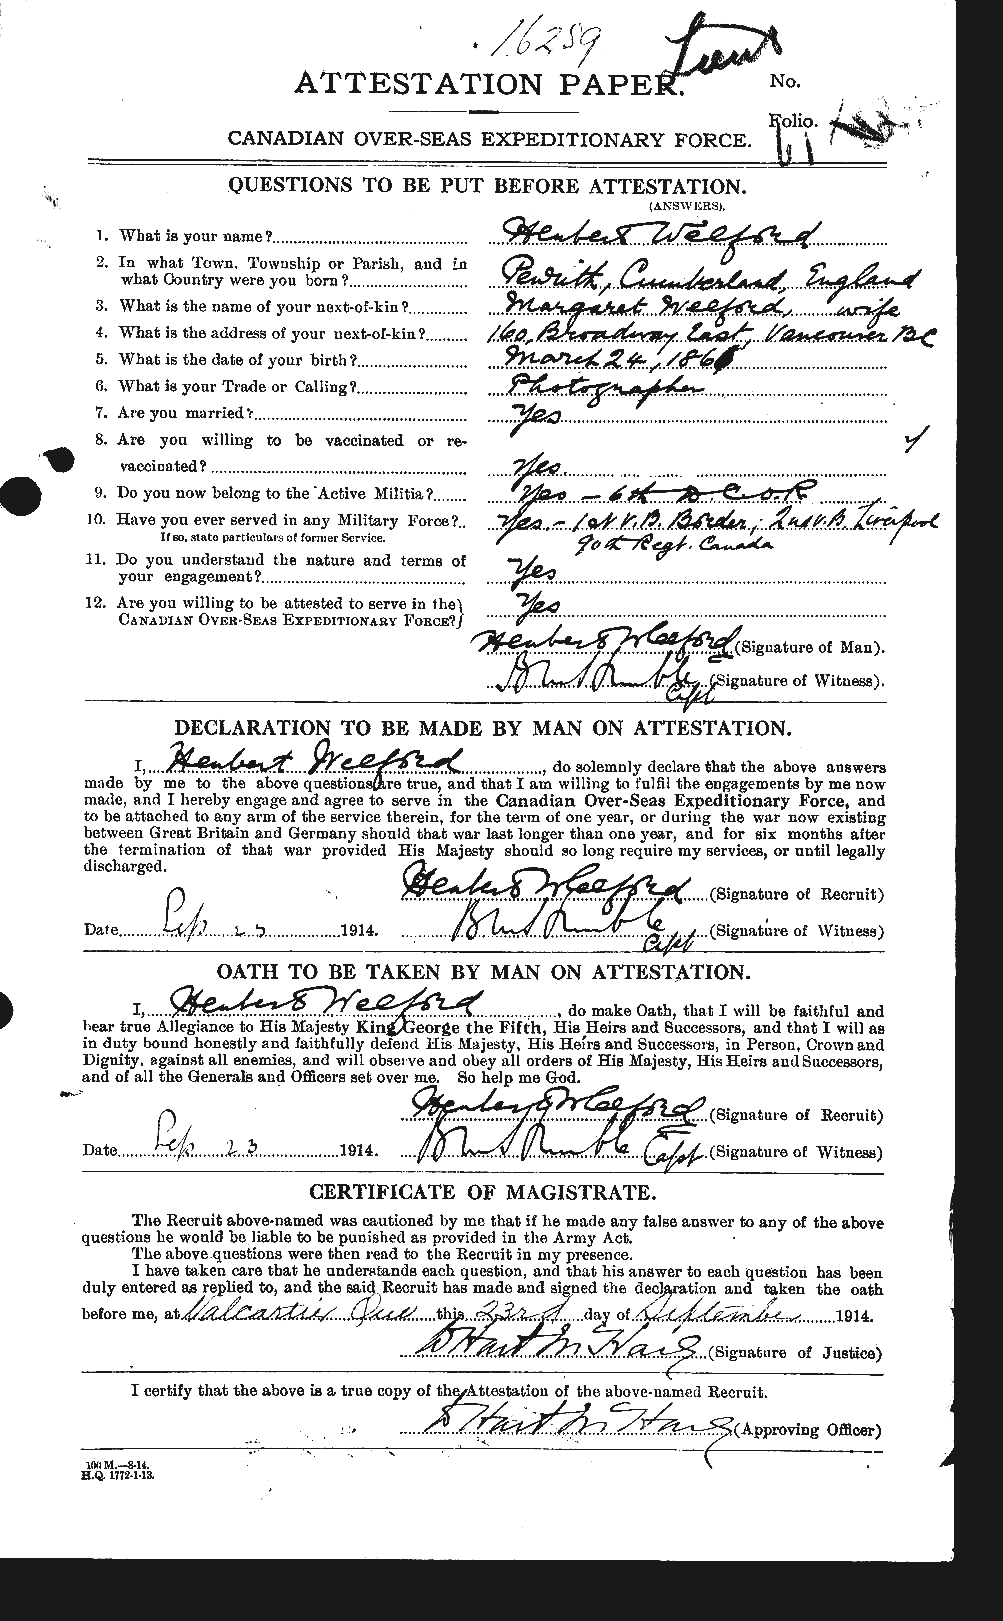 Personnel Records of the First World War - CEF 664810a